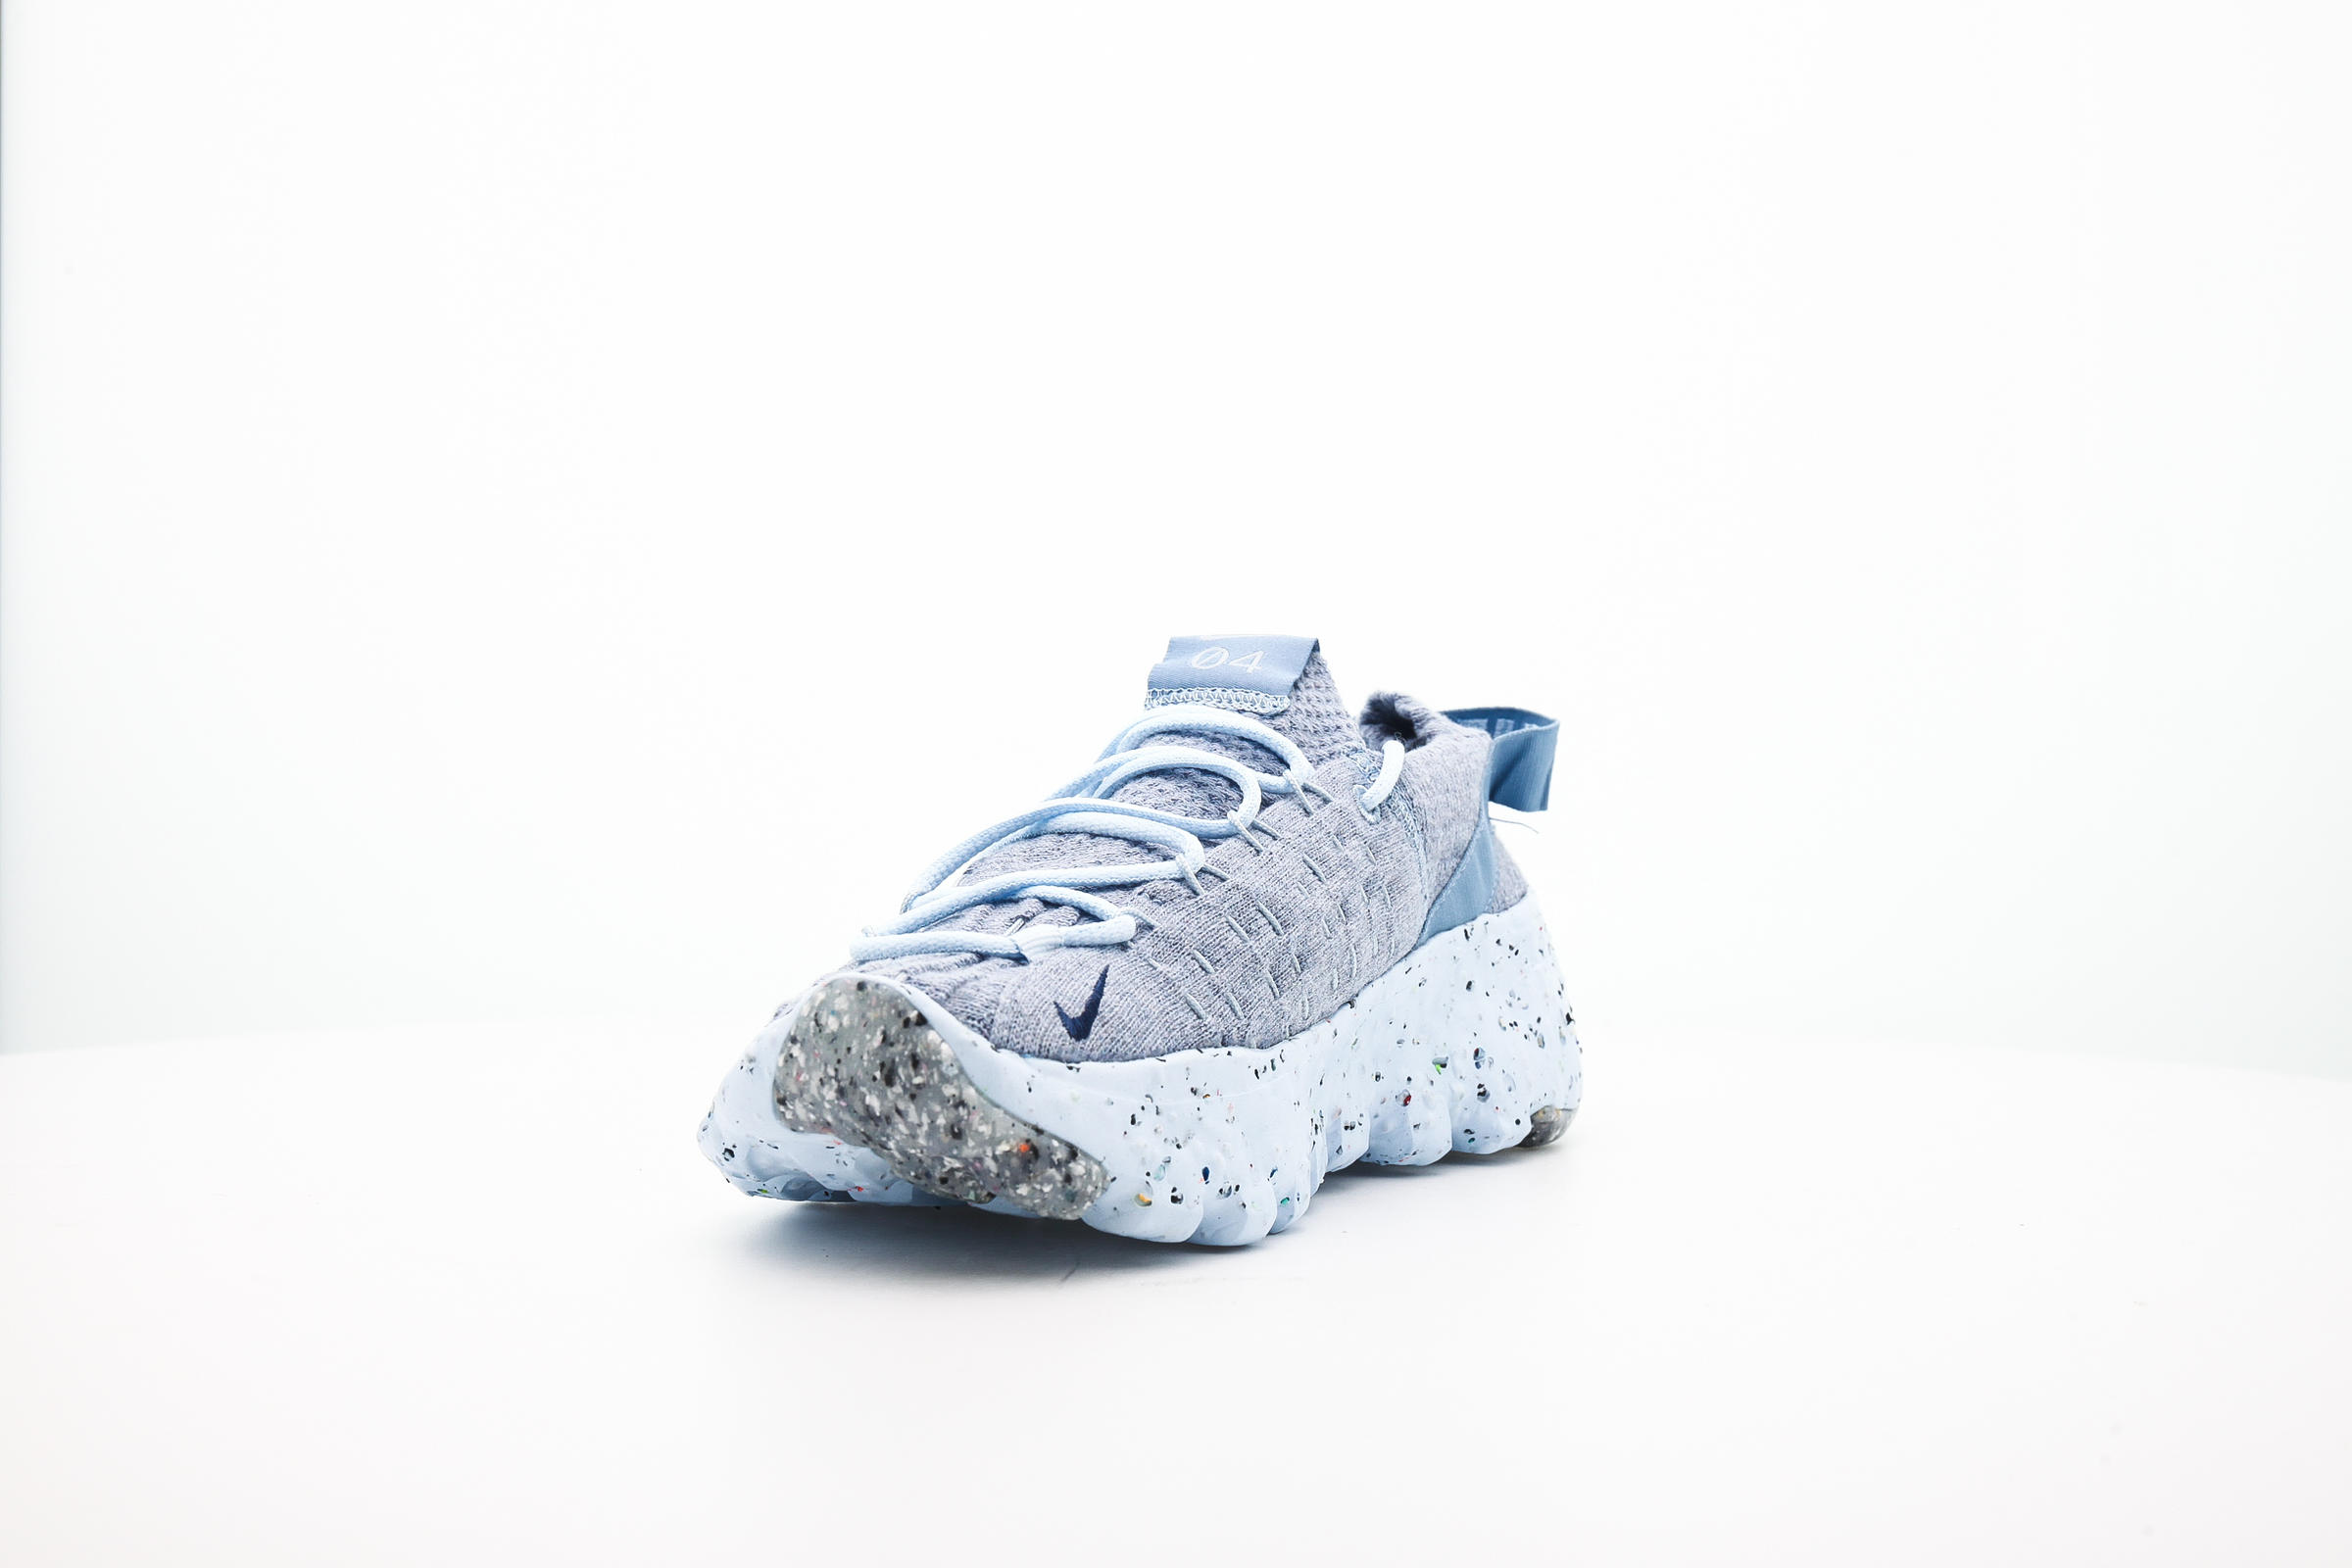 Nike WMNS SPACE HIPPIE 04 "CHAMBRAY BLUE"